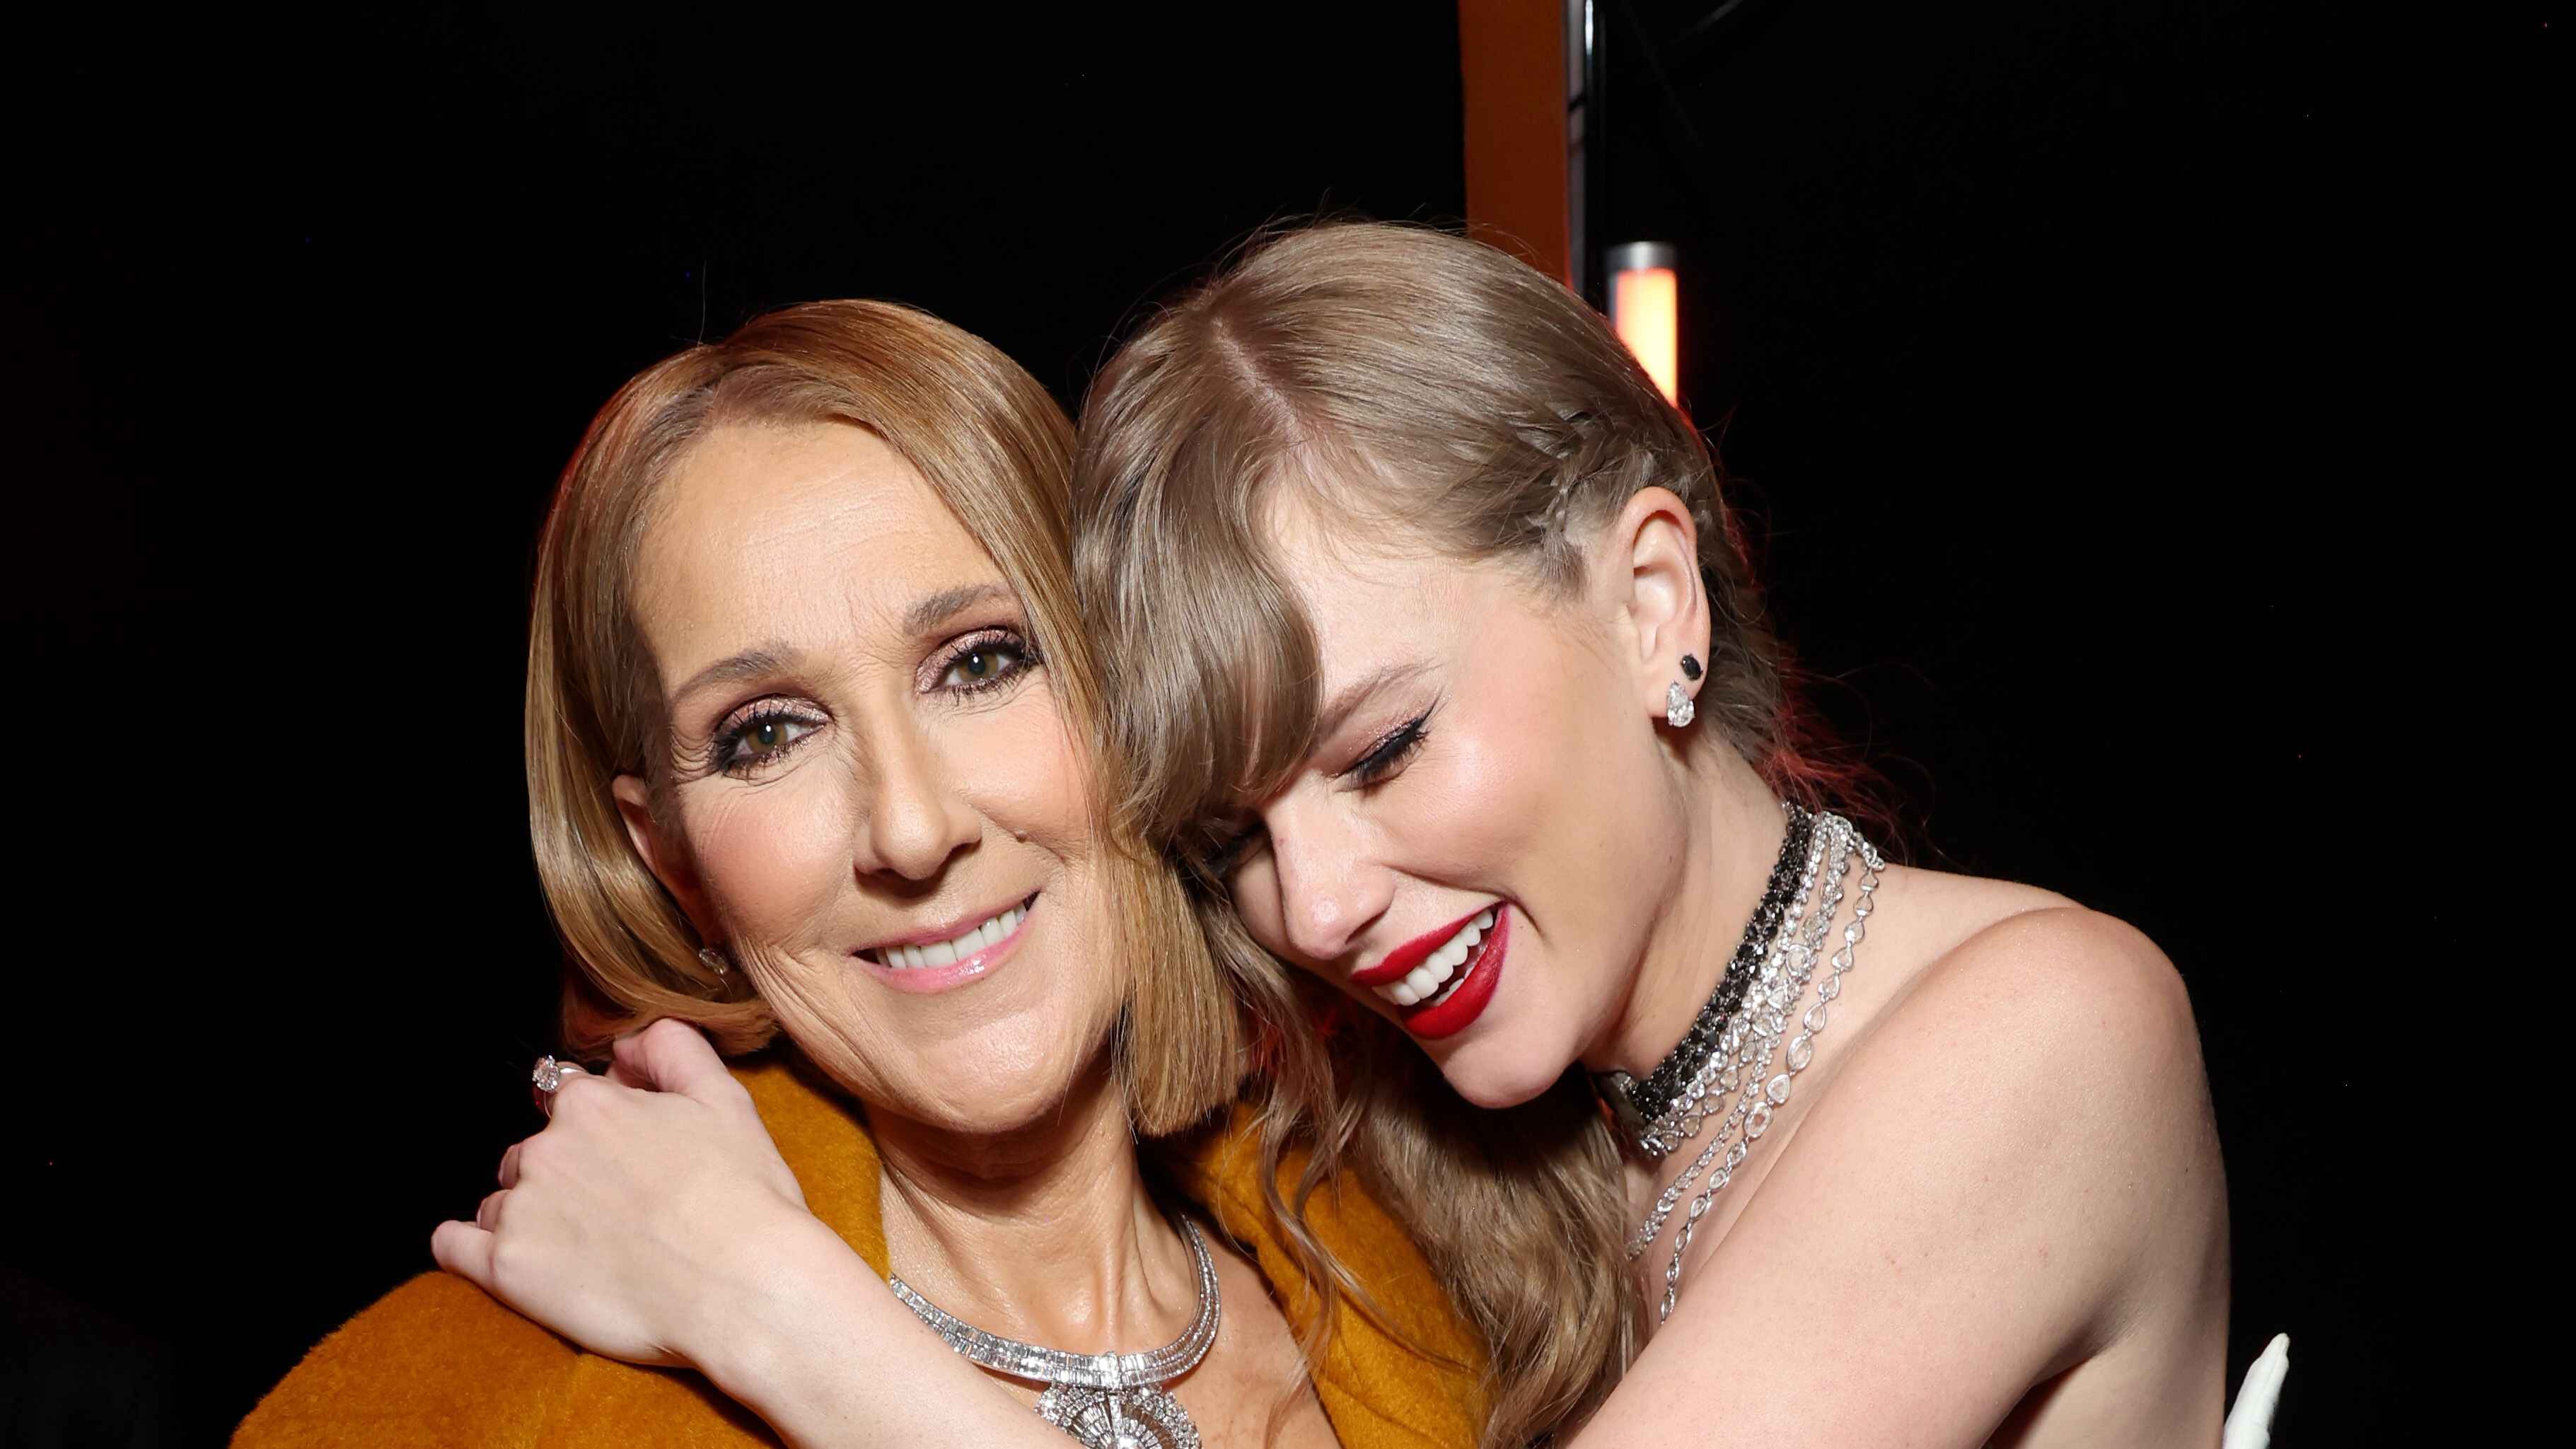 Taylor Swift’s Grammy Win And Awkward Moment With Celine Dion